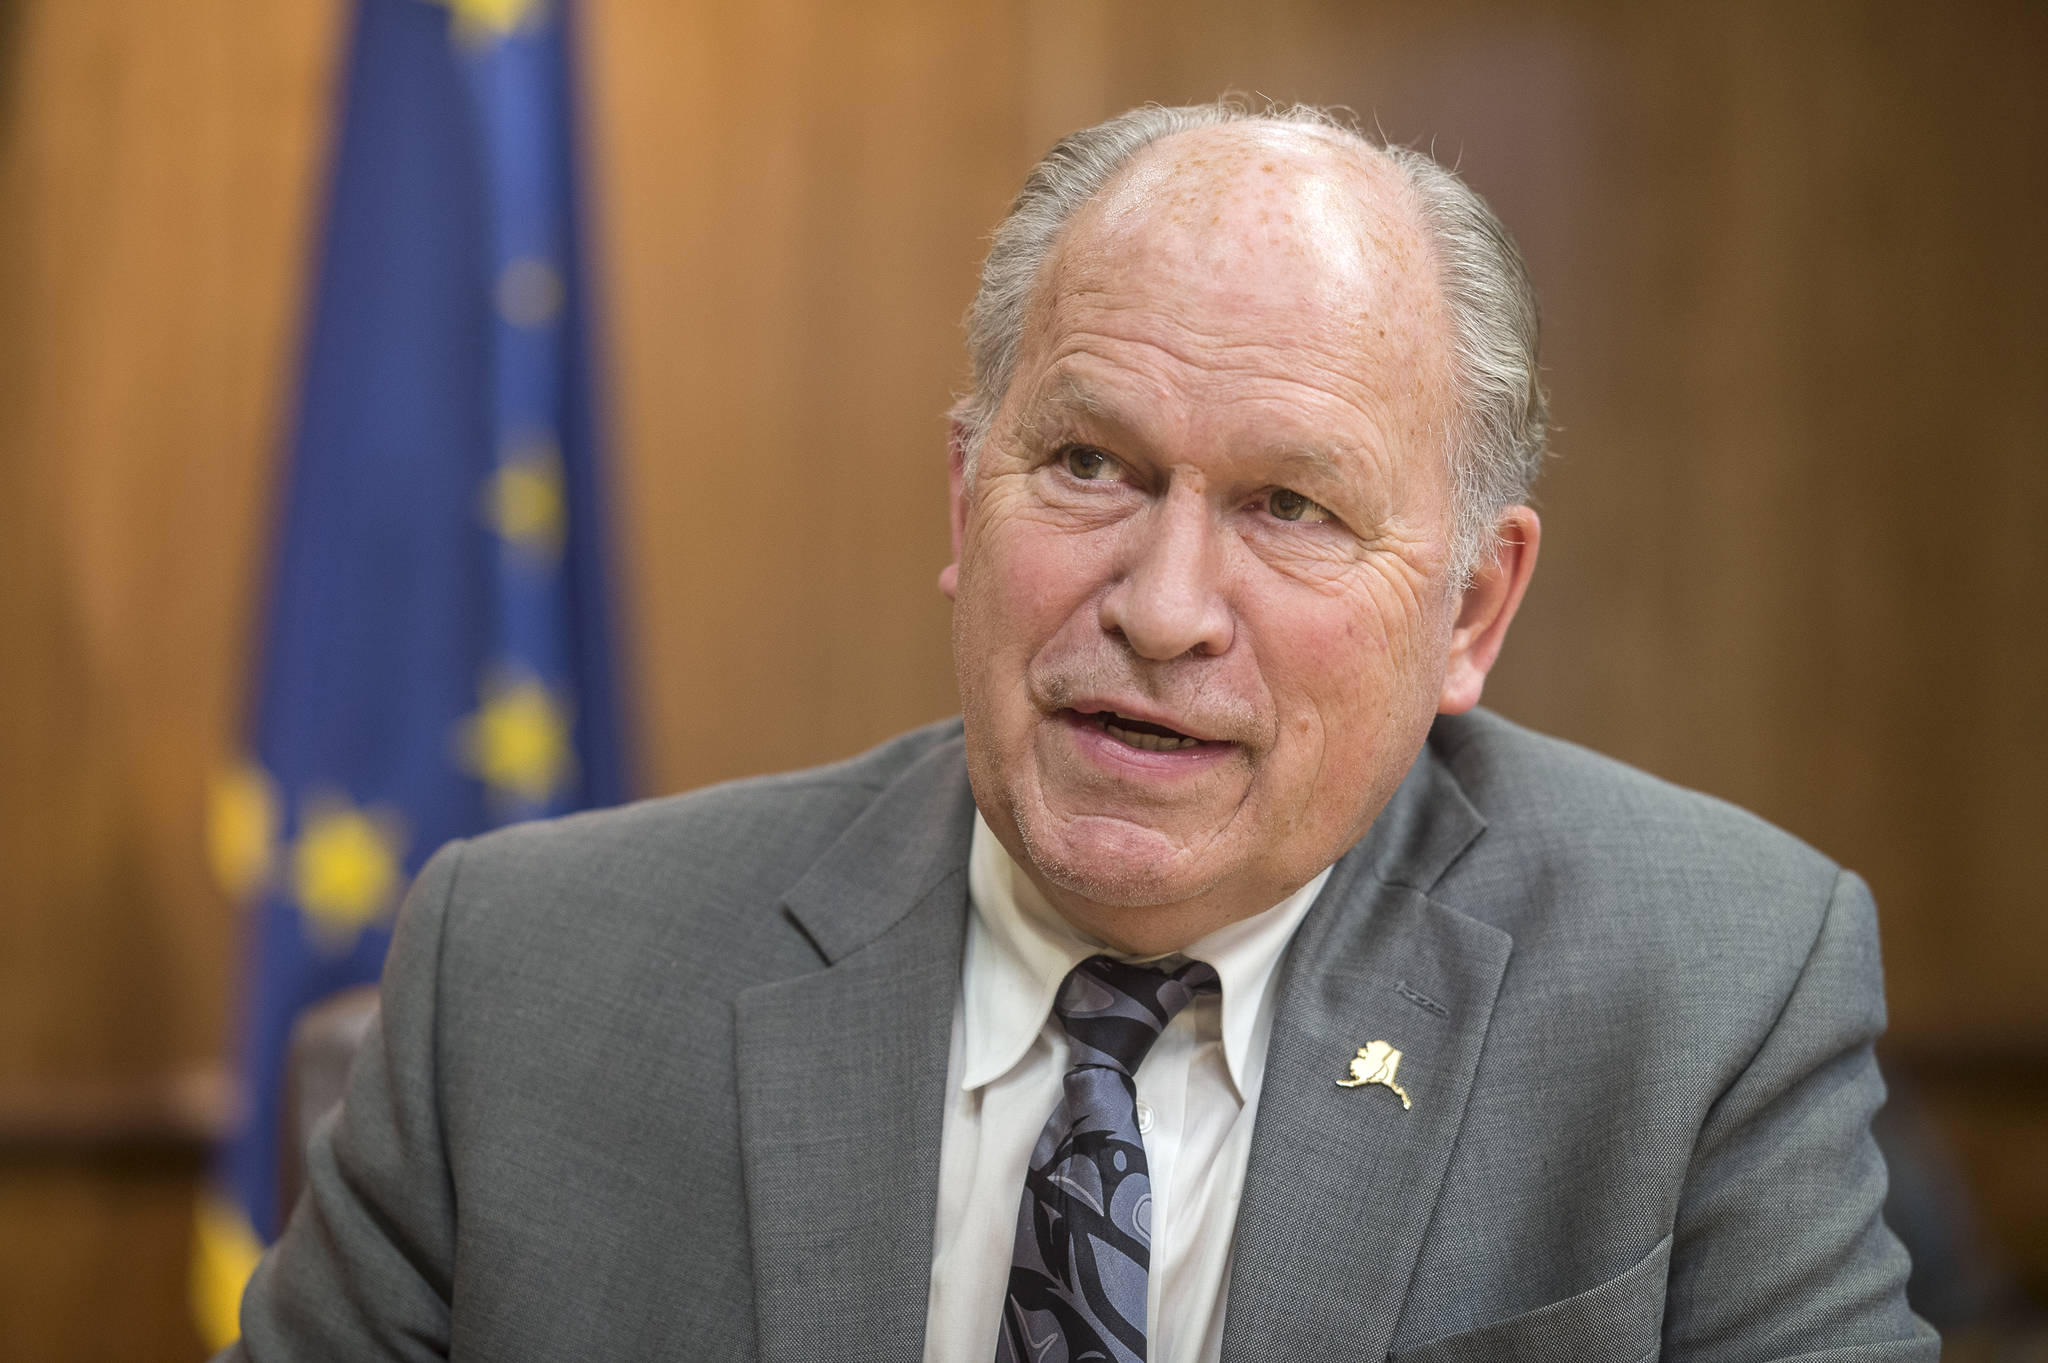 Gov. Bill Walker talks about his four years as governor during an interview on Wednesday, Nov. 28, 2018. (Michael Penn | Juneau Empire)